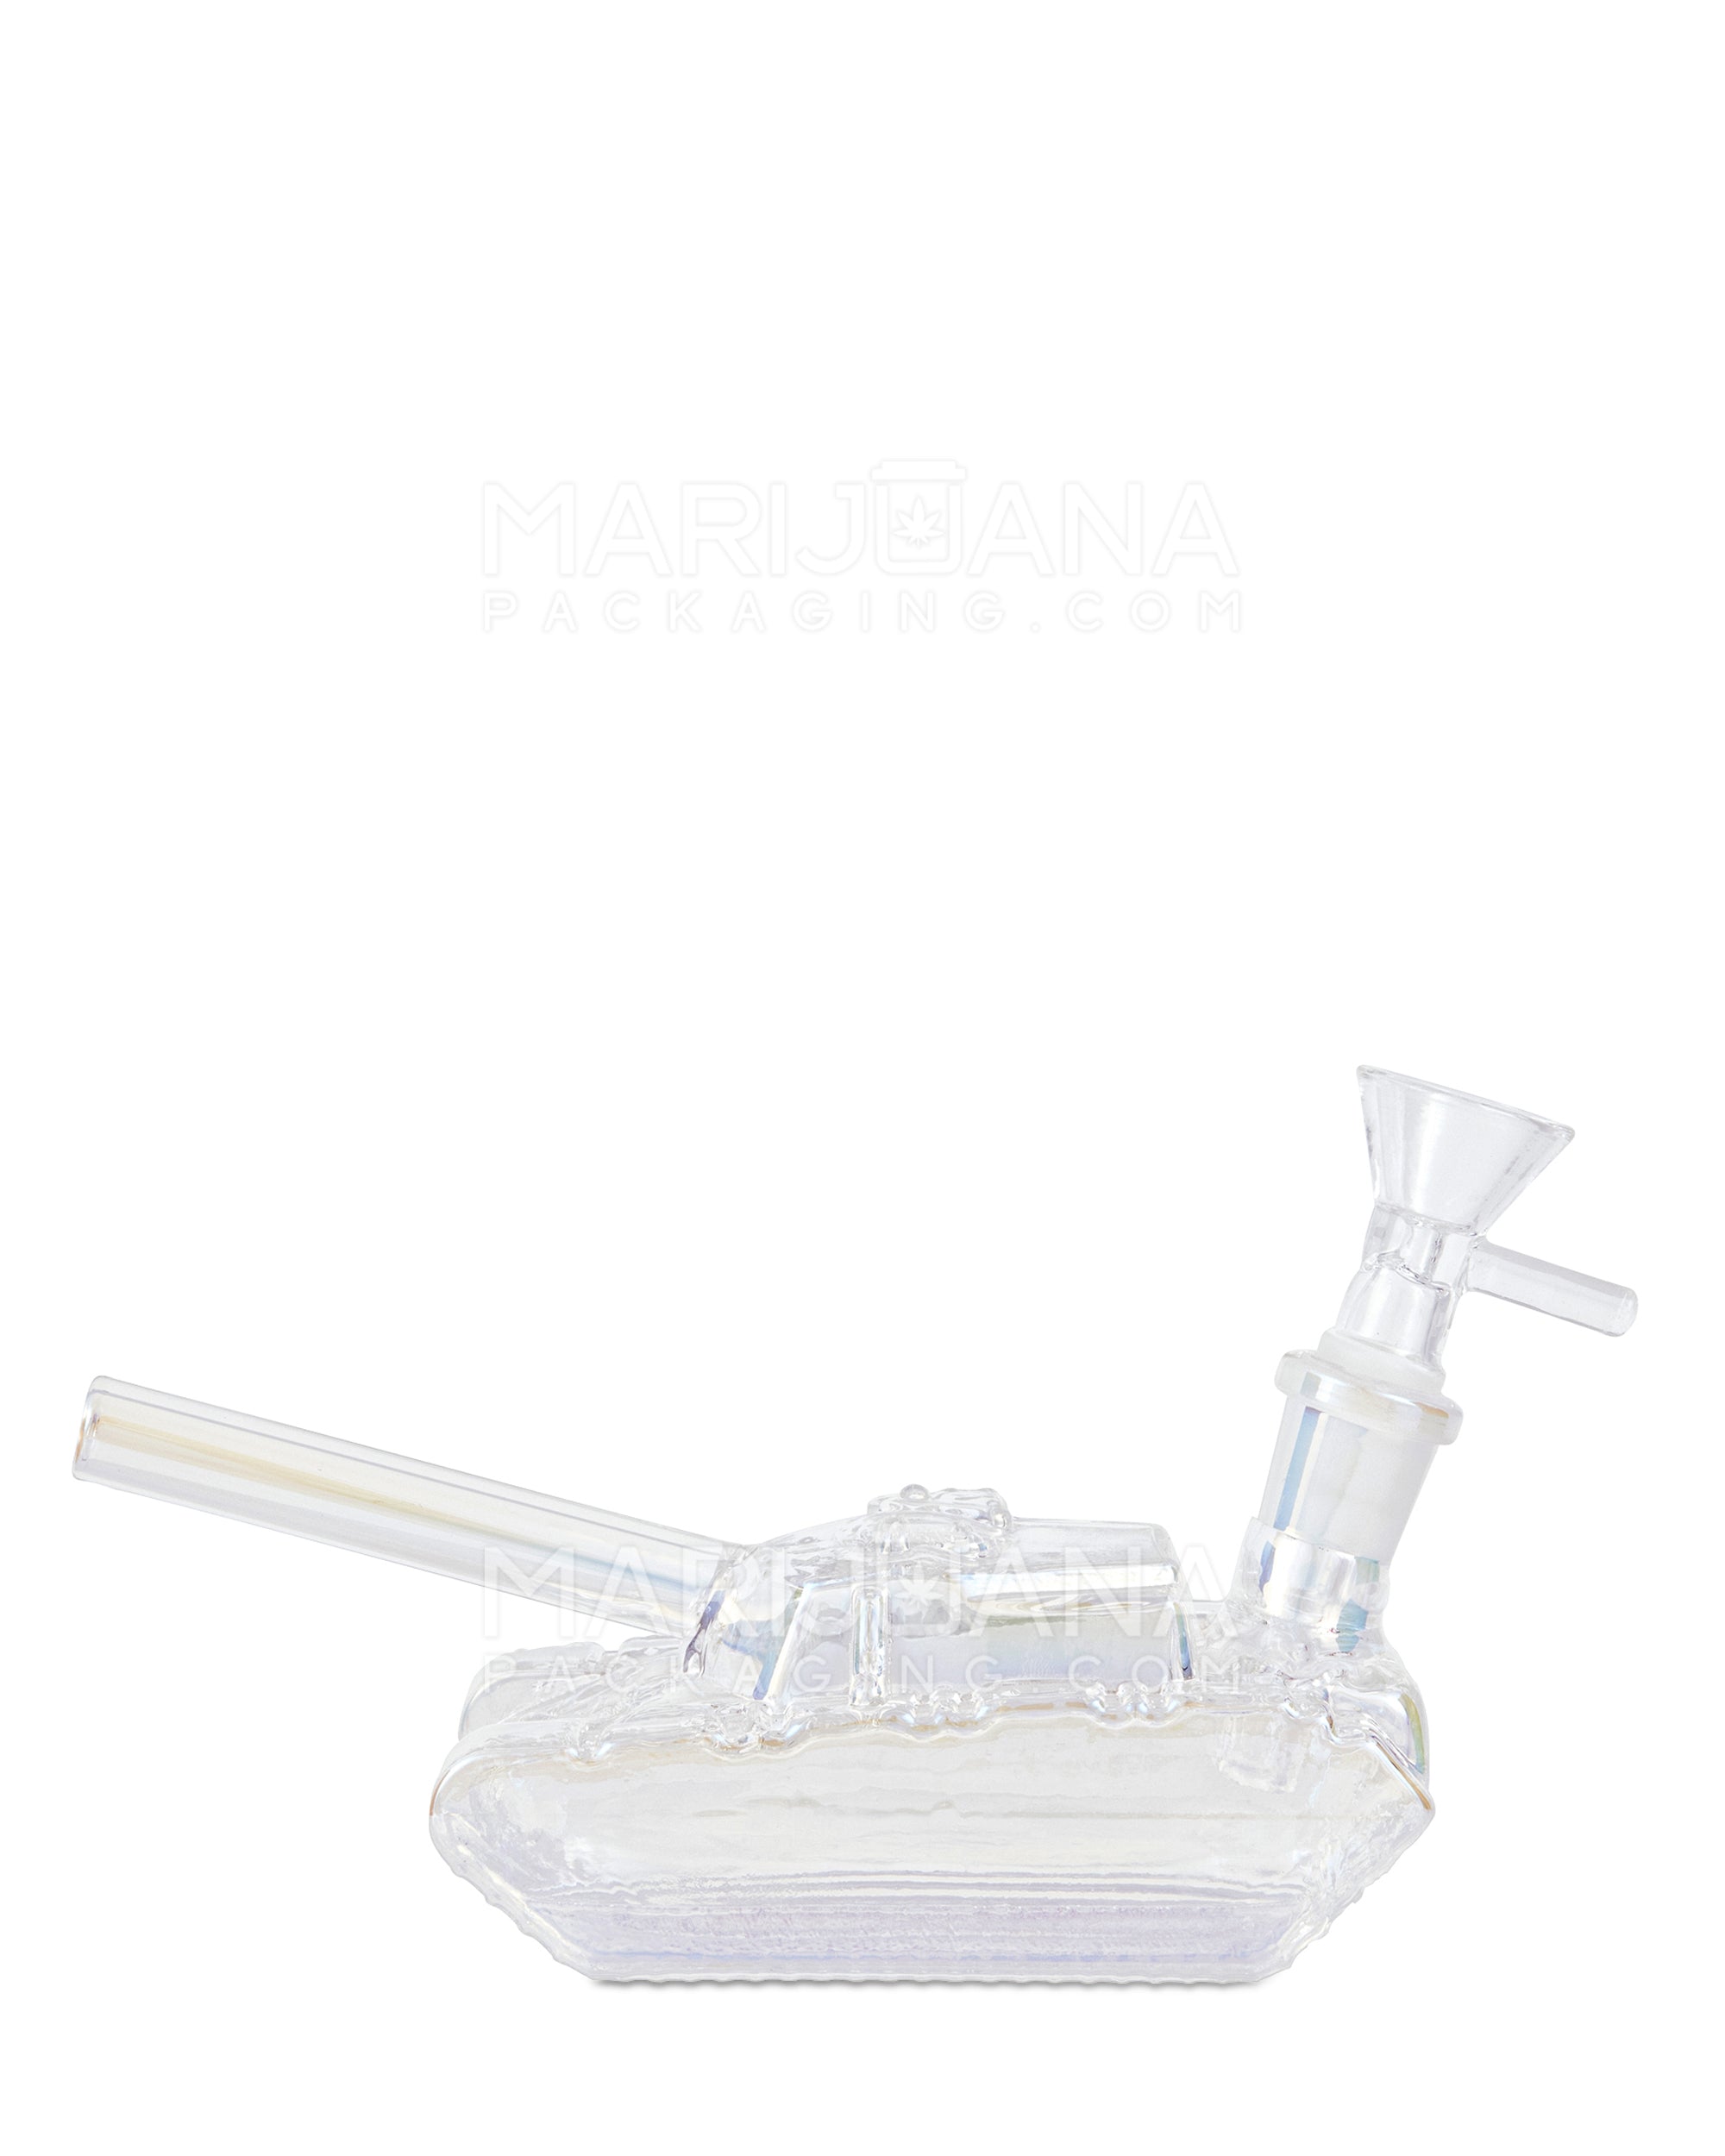 USA Glass | Iridescent Military Tank Glass Water Pipe | 6in Long - 14mm Bowl - Clear - 1